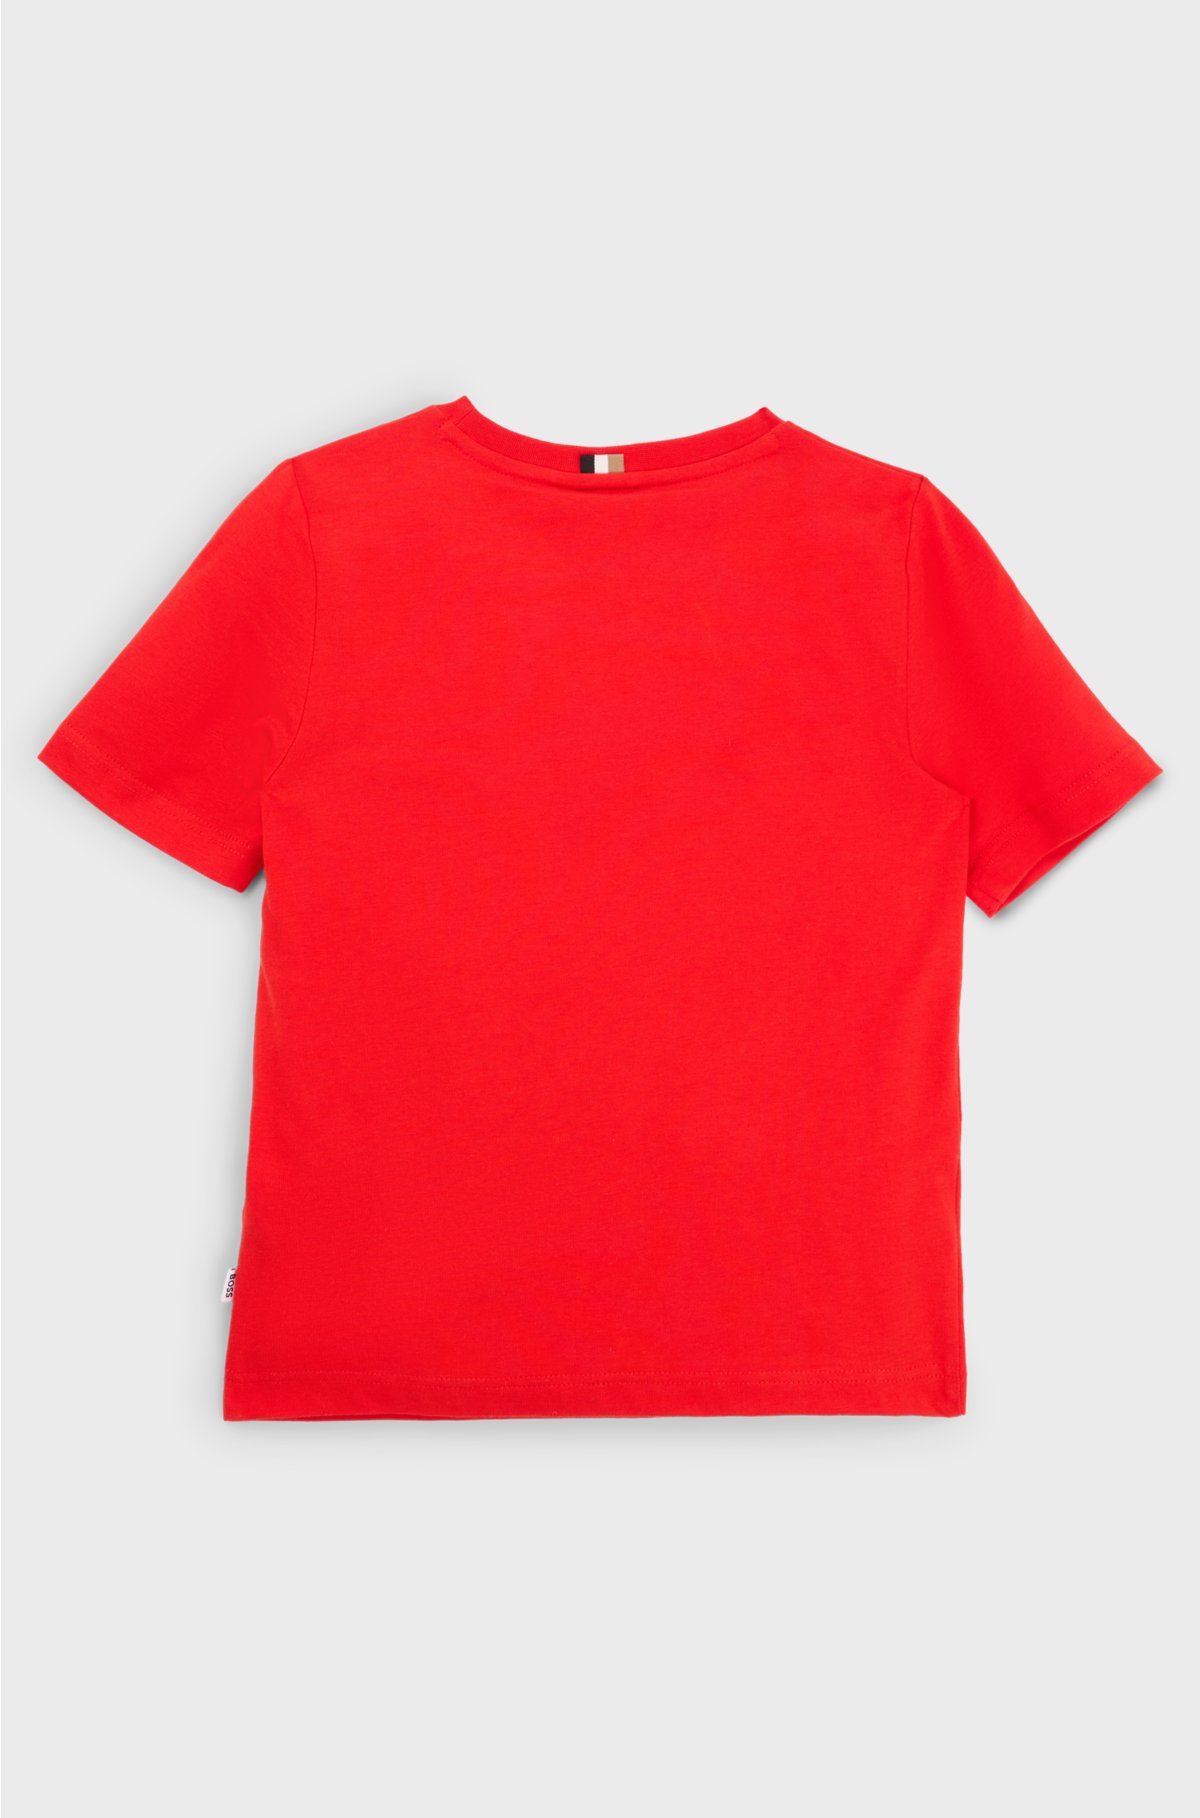 Kids' T-shirt in cotton with logo artwork, Red